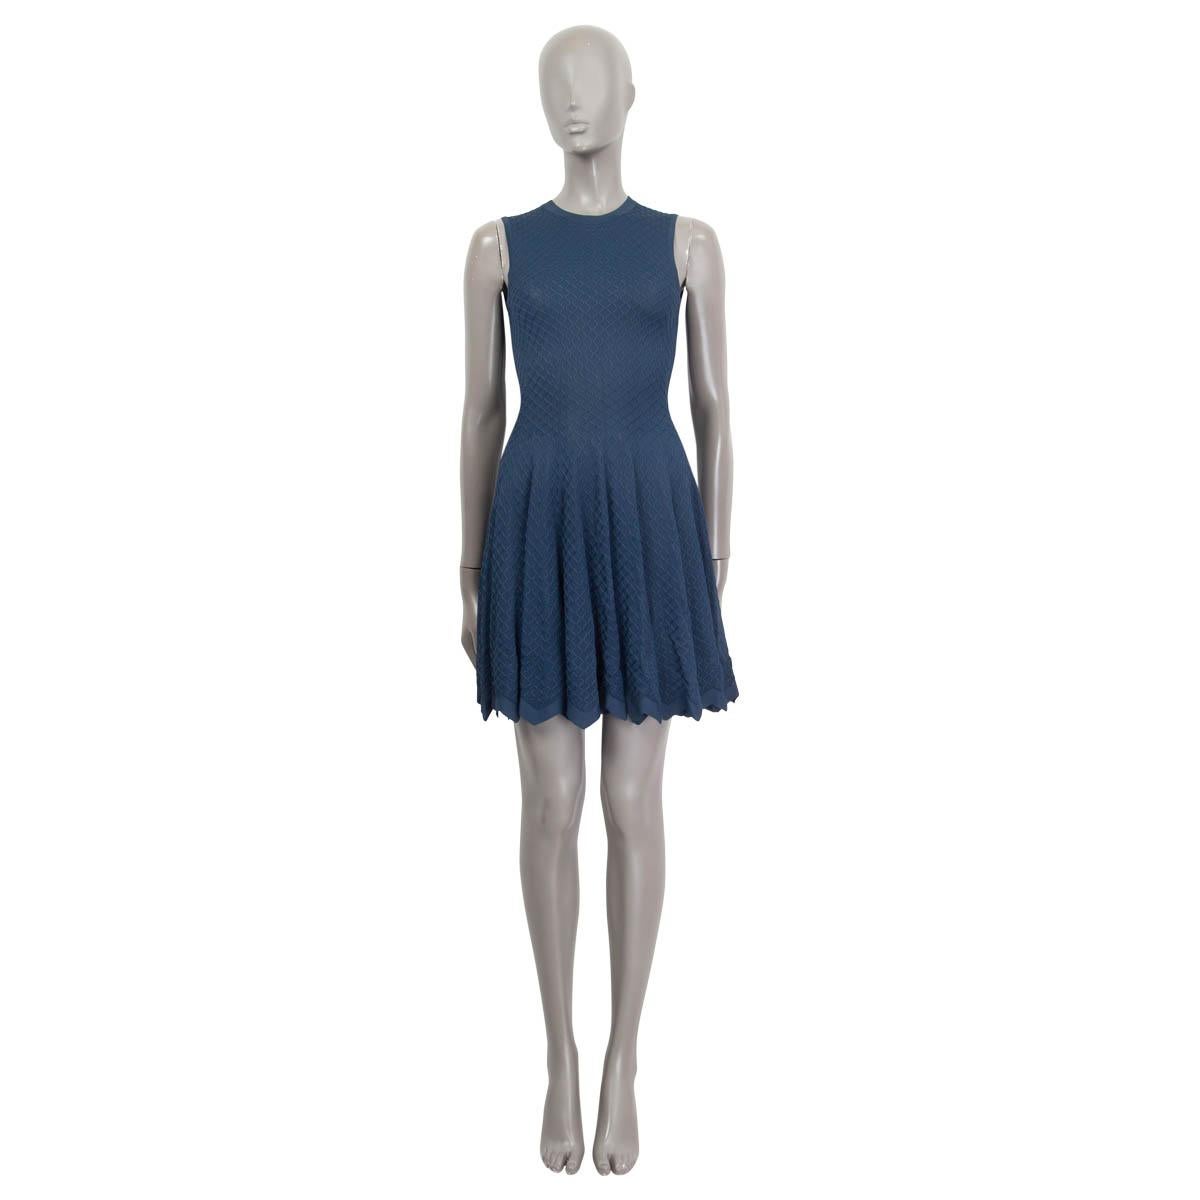 100% authentic Alaia fishnet knit dress in blue viscose (100%). Features a zigzag hemline. Opens with a concealed zipper on the back. Unlined. Has been worn and is in excellent condition.

Measurements
Tag Size	36
Size	XS
Shoulder Width	30cm